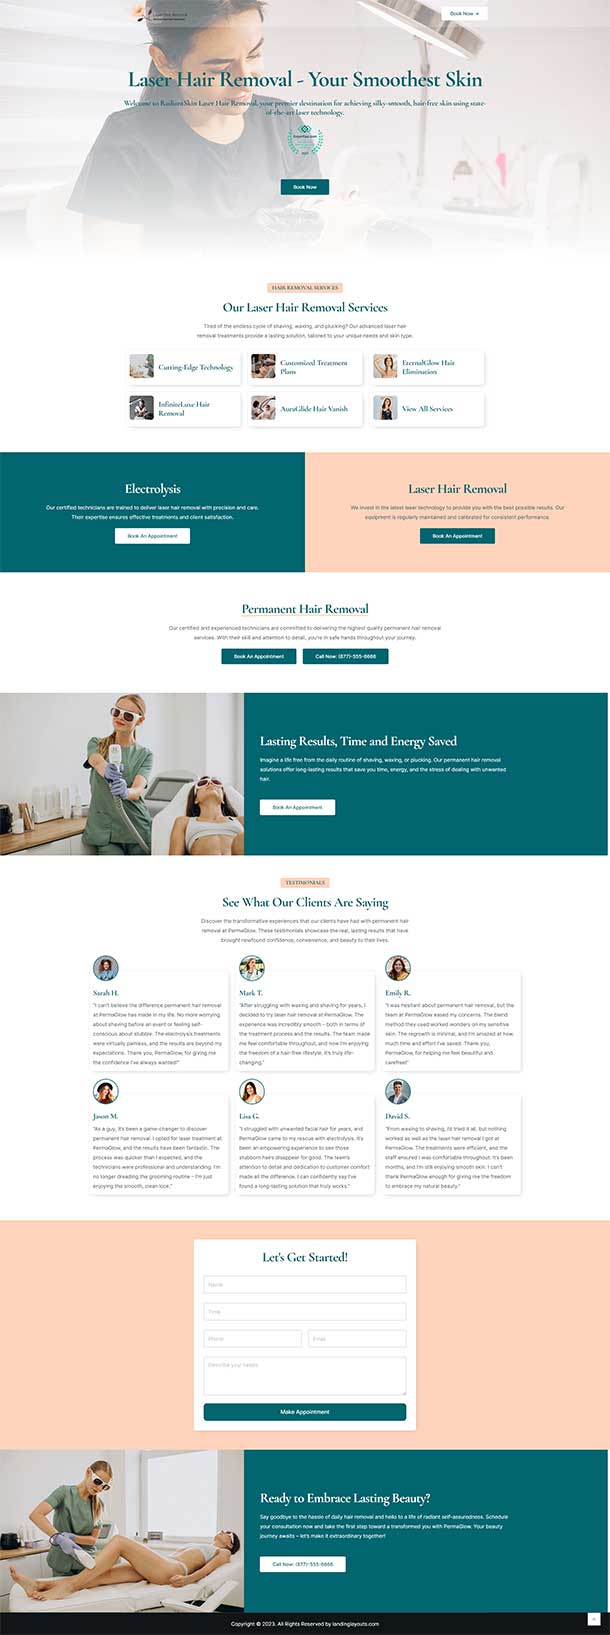 Effective Laser Hair Removal Lead Generation Landing Page